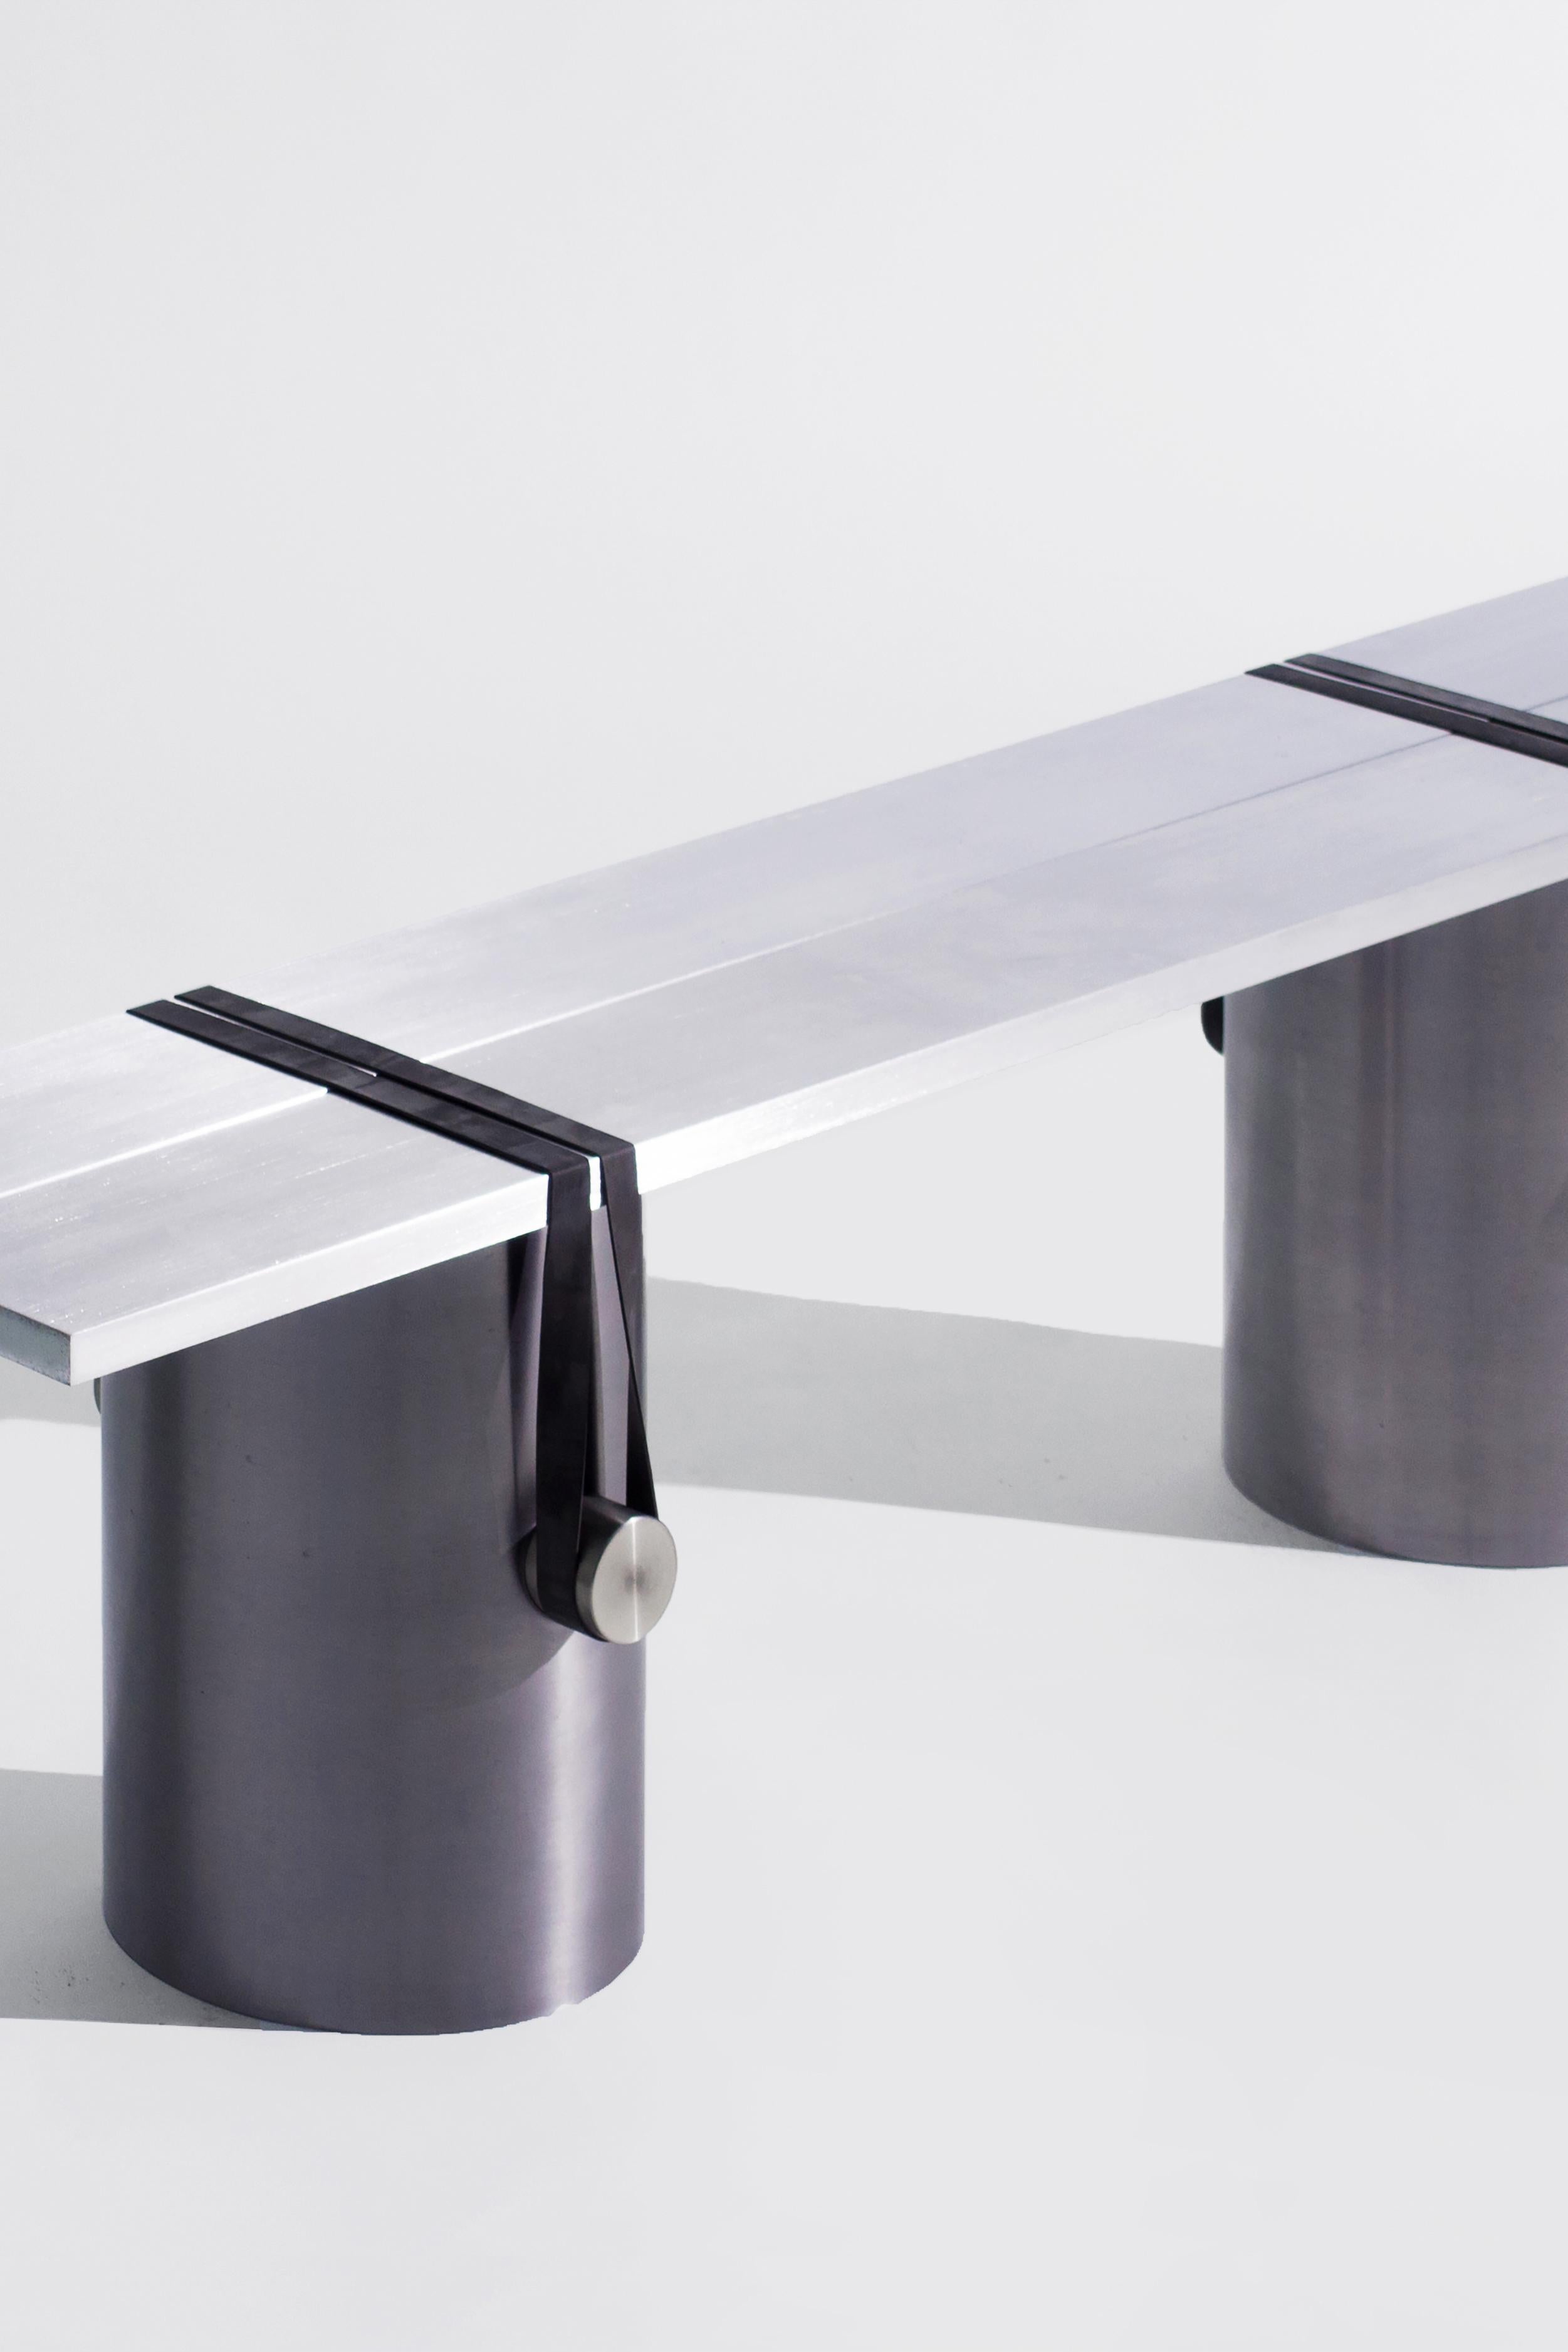 French Contemporary RB02 Bench in Steel, Stainless Steel and Aluminium For Sale